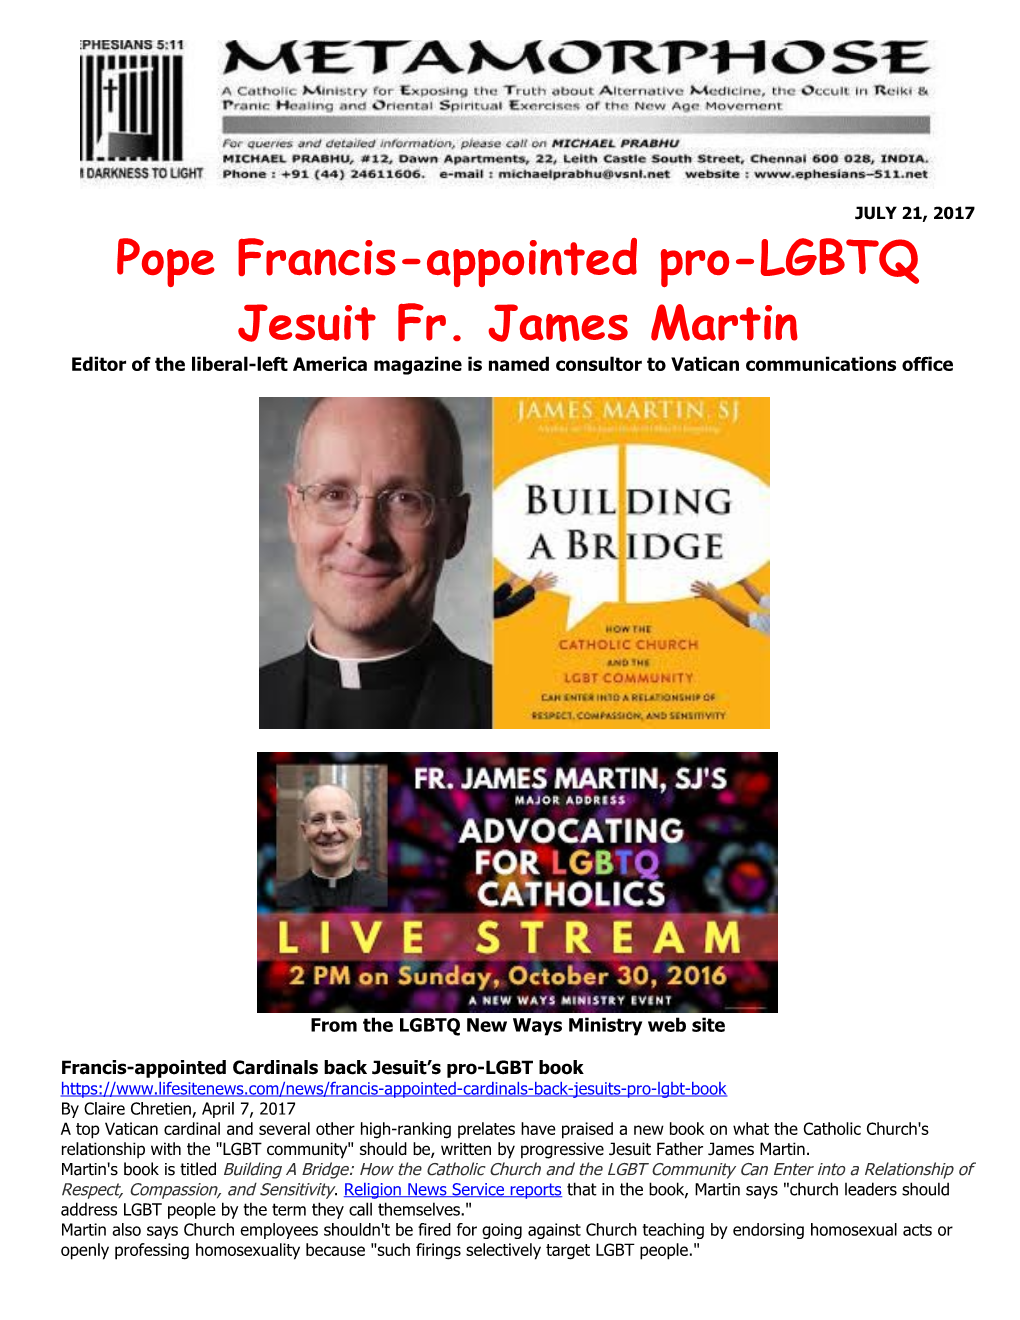 Pope Francis-Appointed Pro-LGBTQ Jesuit Fr. James Martin